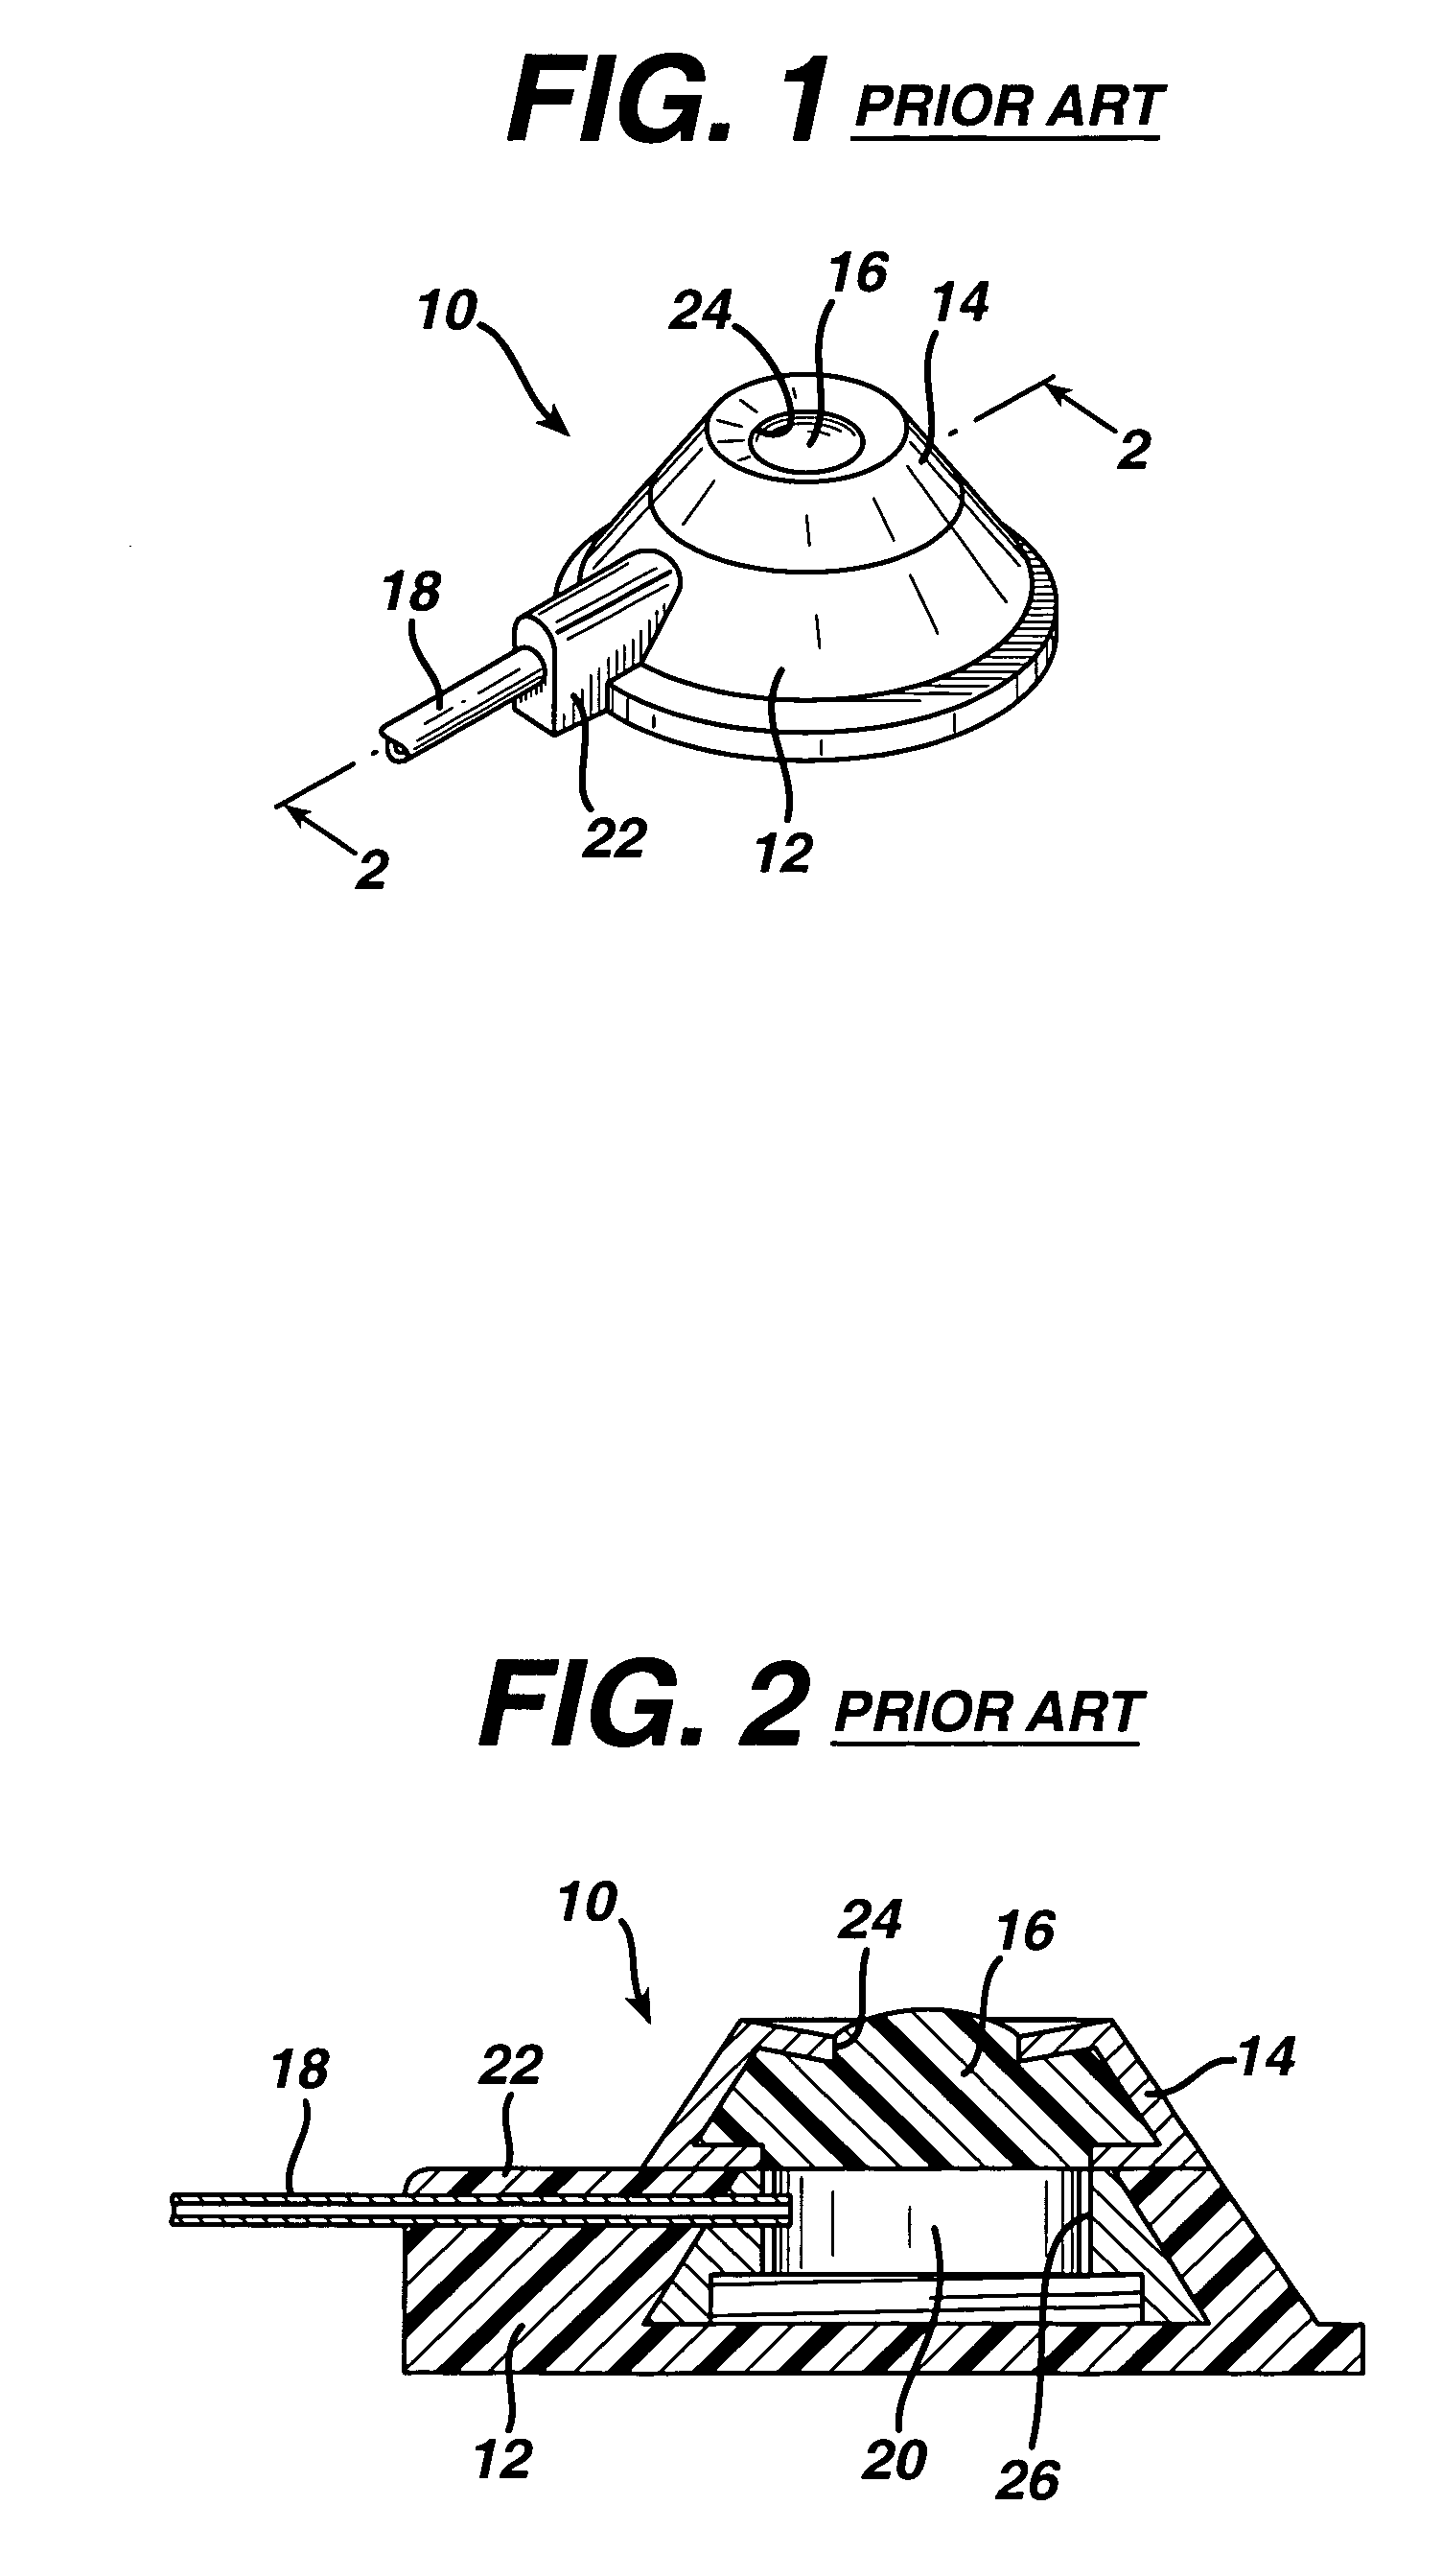 Method for implanting flexible injection port